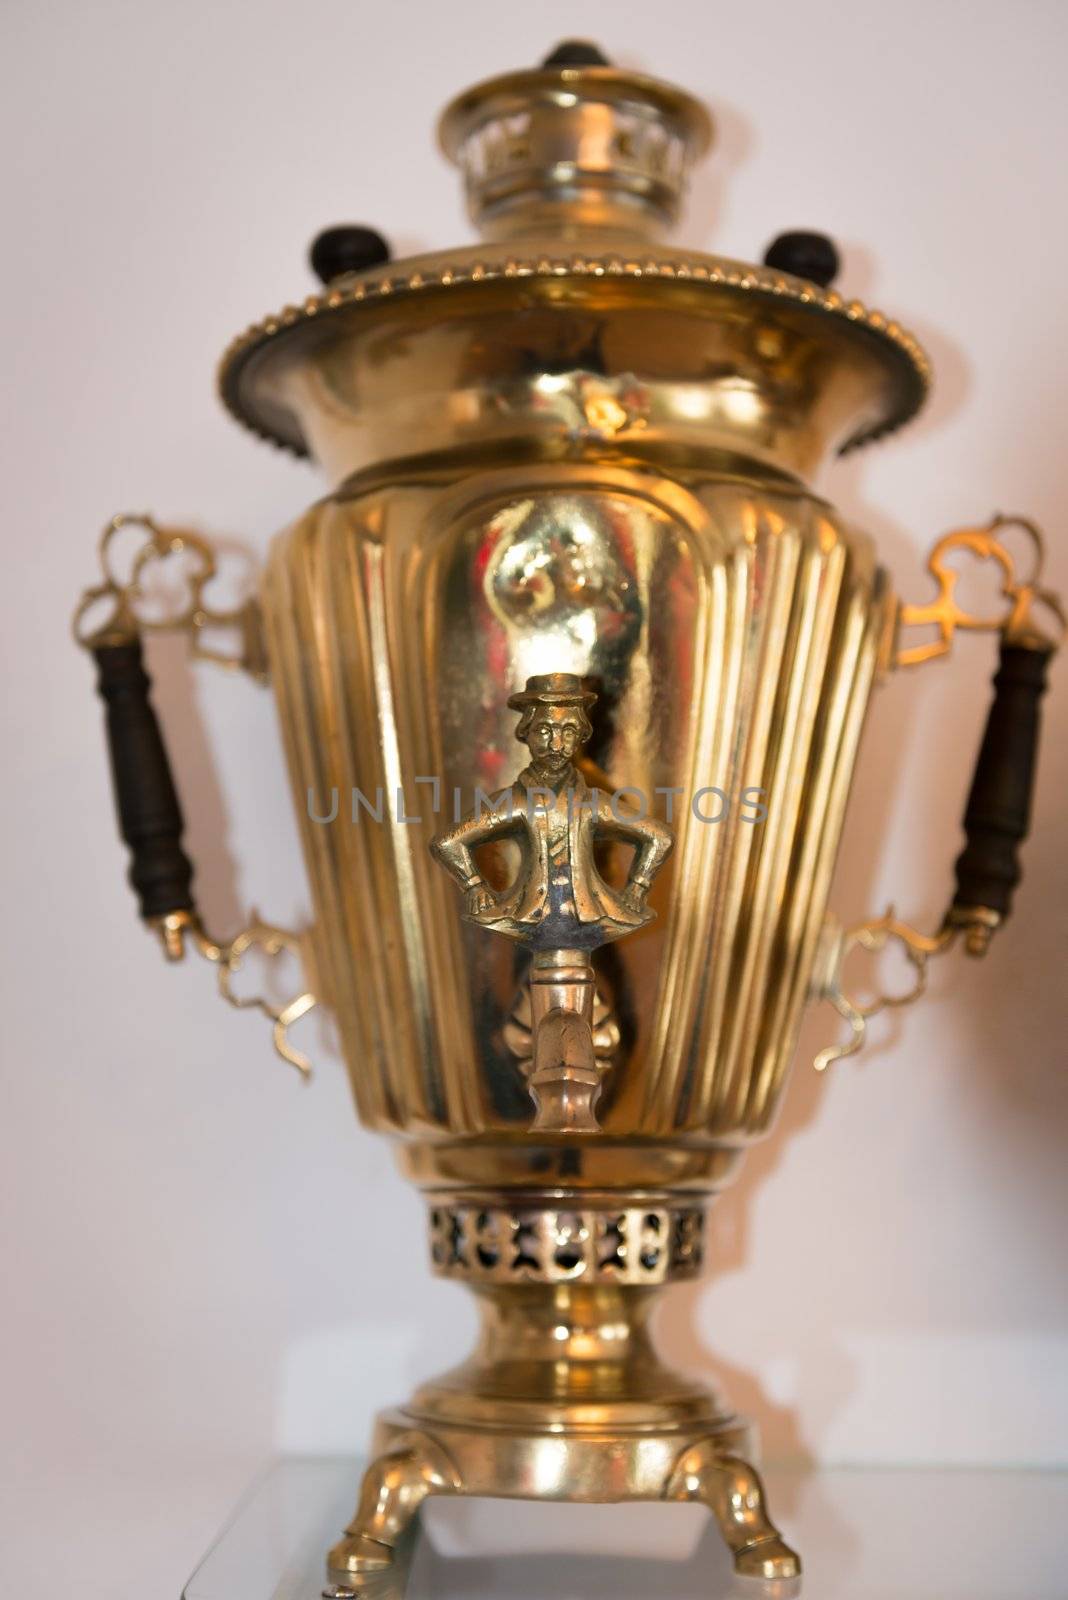 Traditional samovar with man figure valve and selective focus on the front